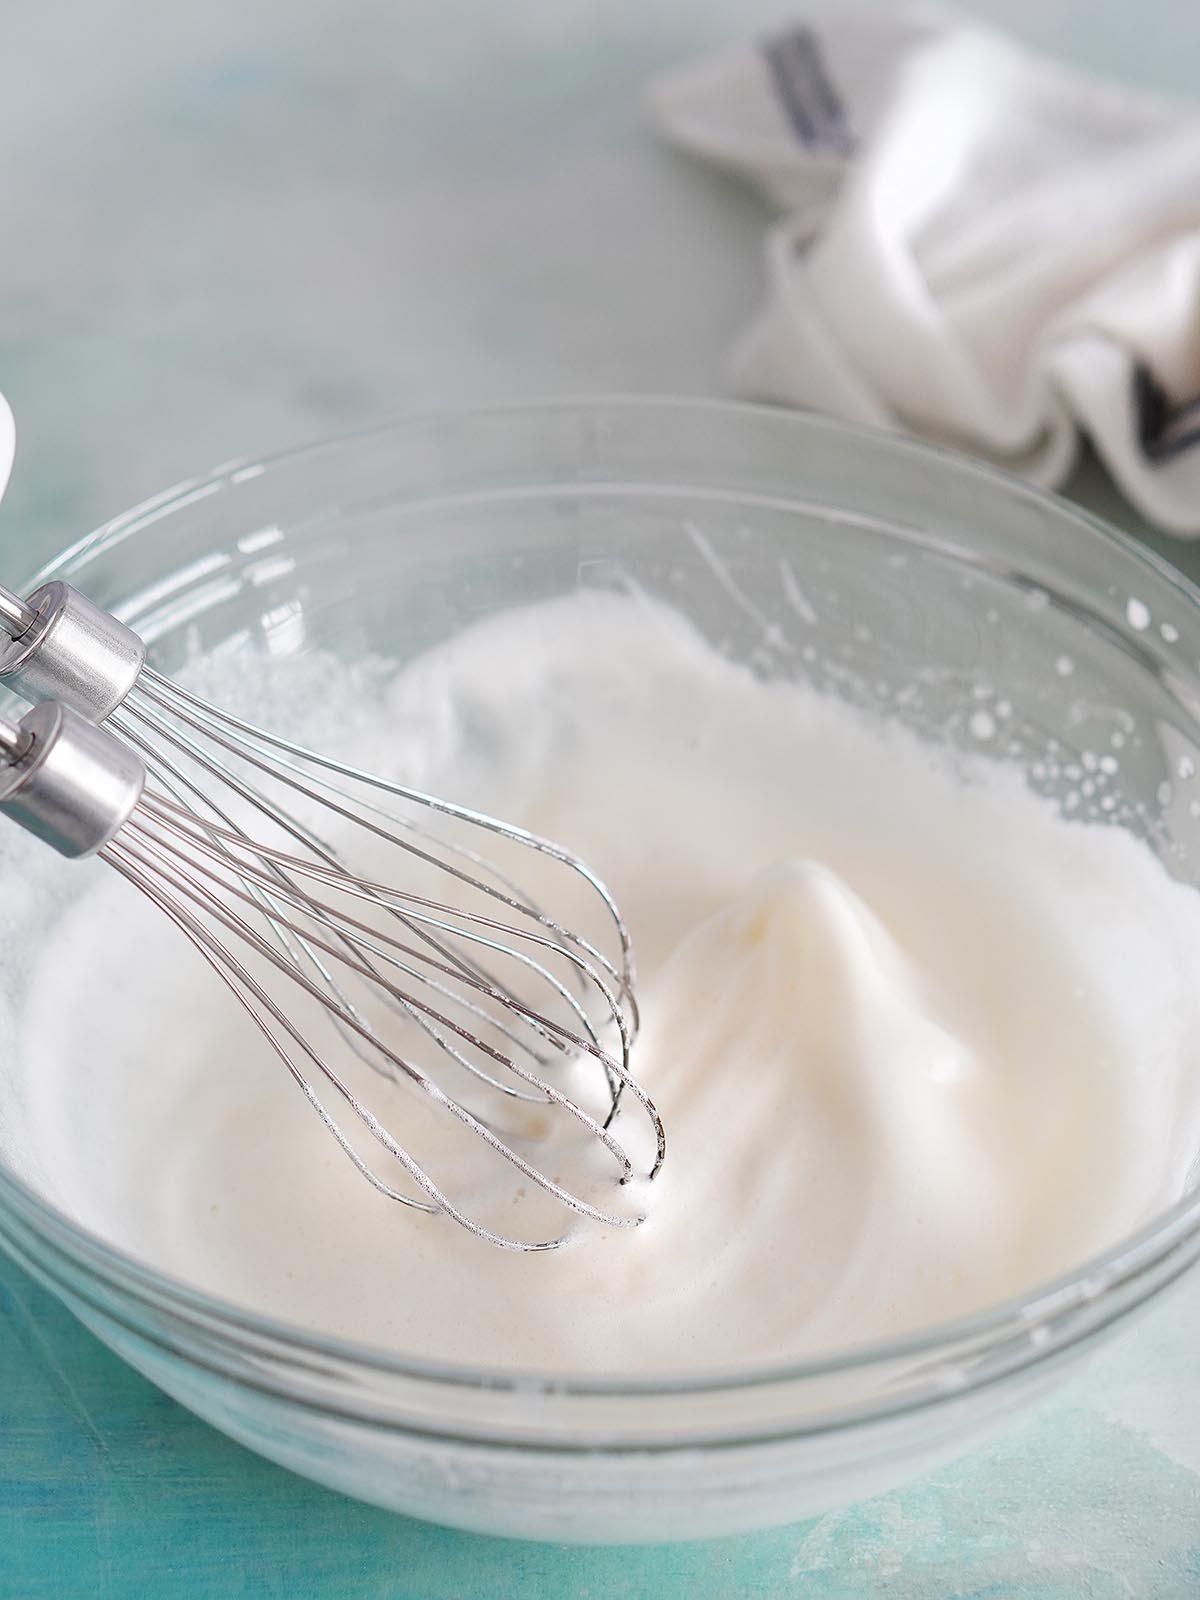 Whipping egg whites with a hand mixer.